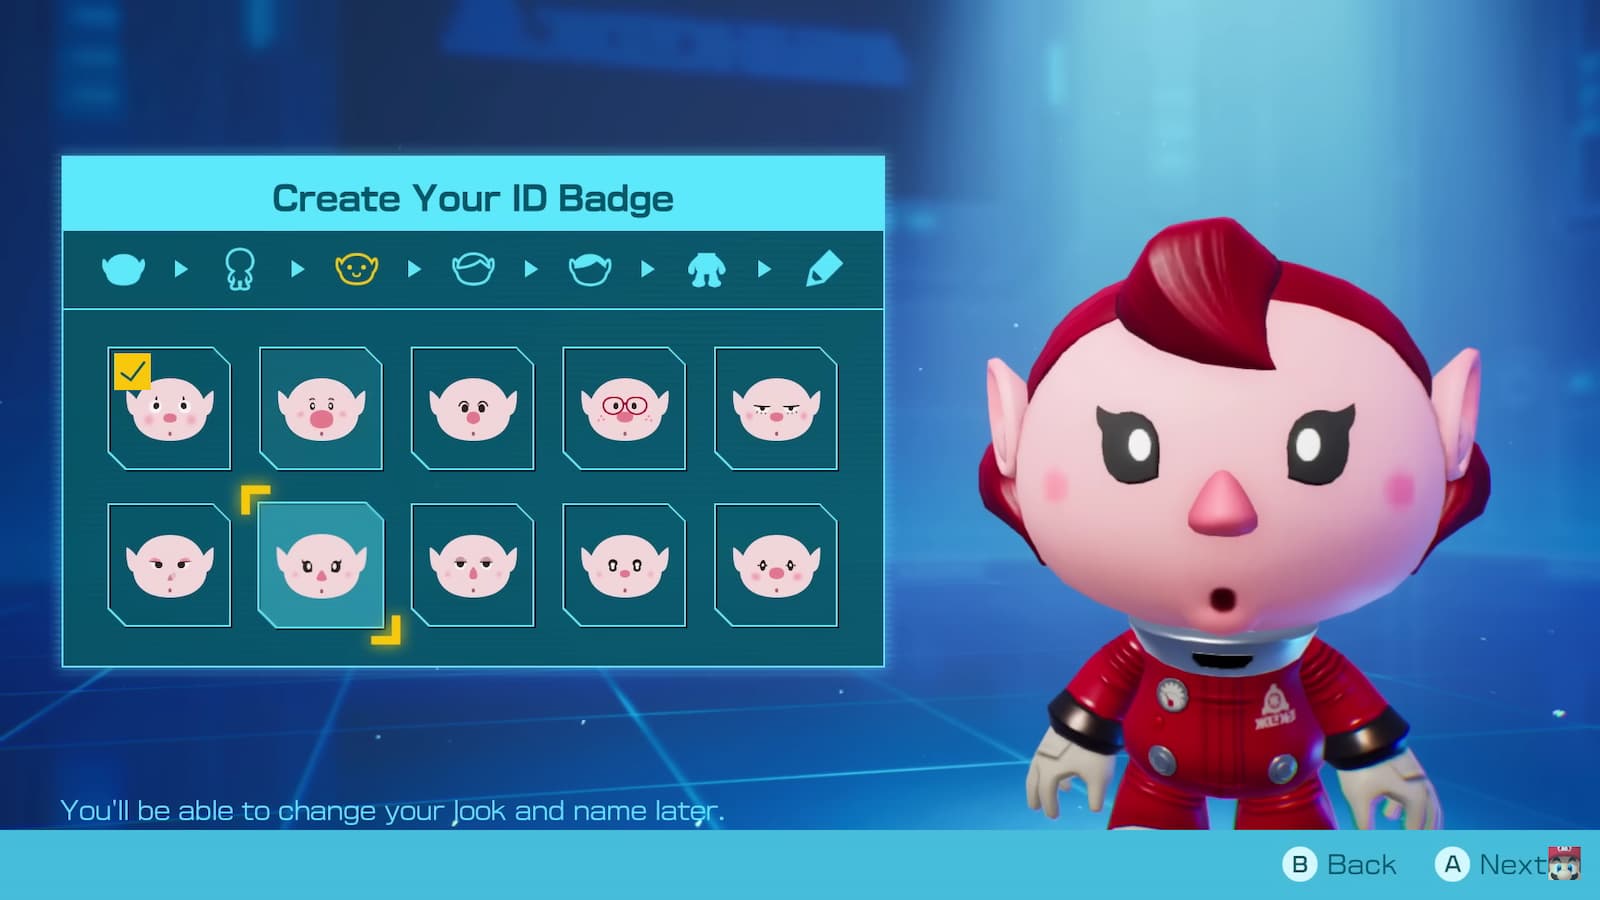 Pikmin 4 avatar customization screen showing all of the different variations players will be able to choose from.